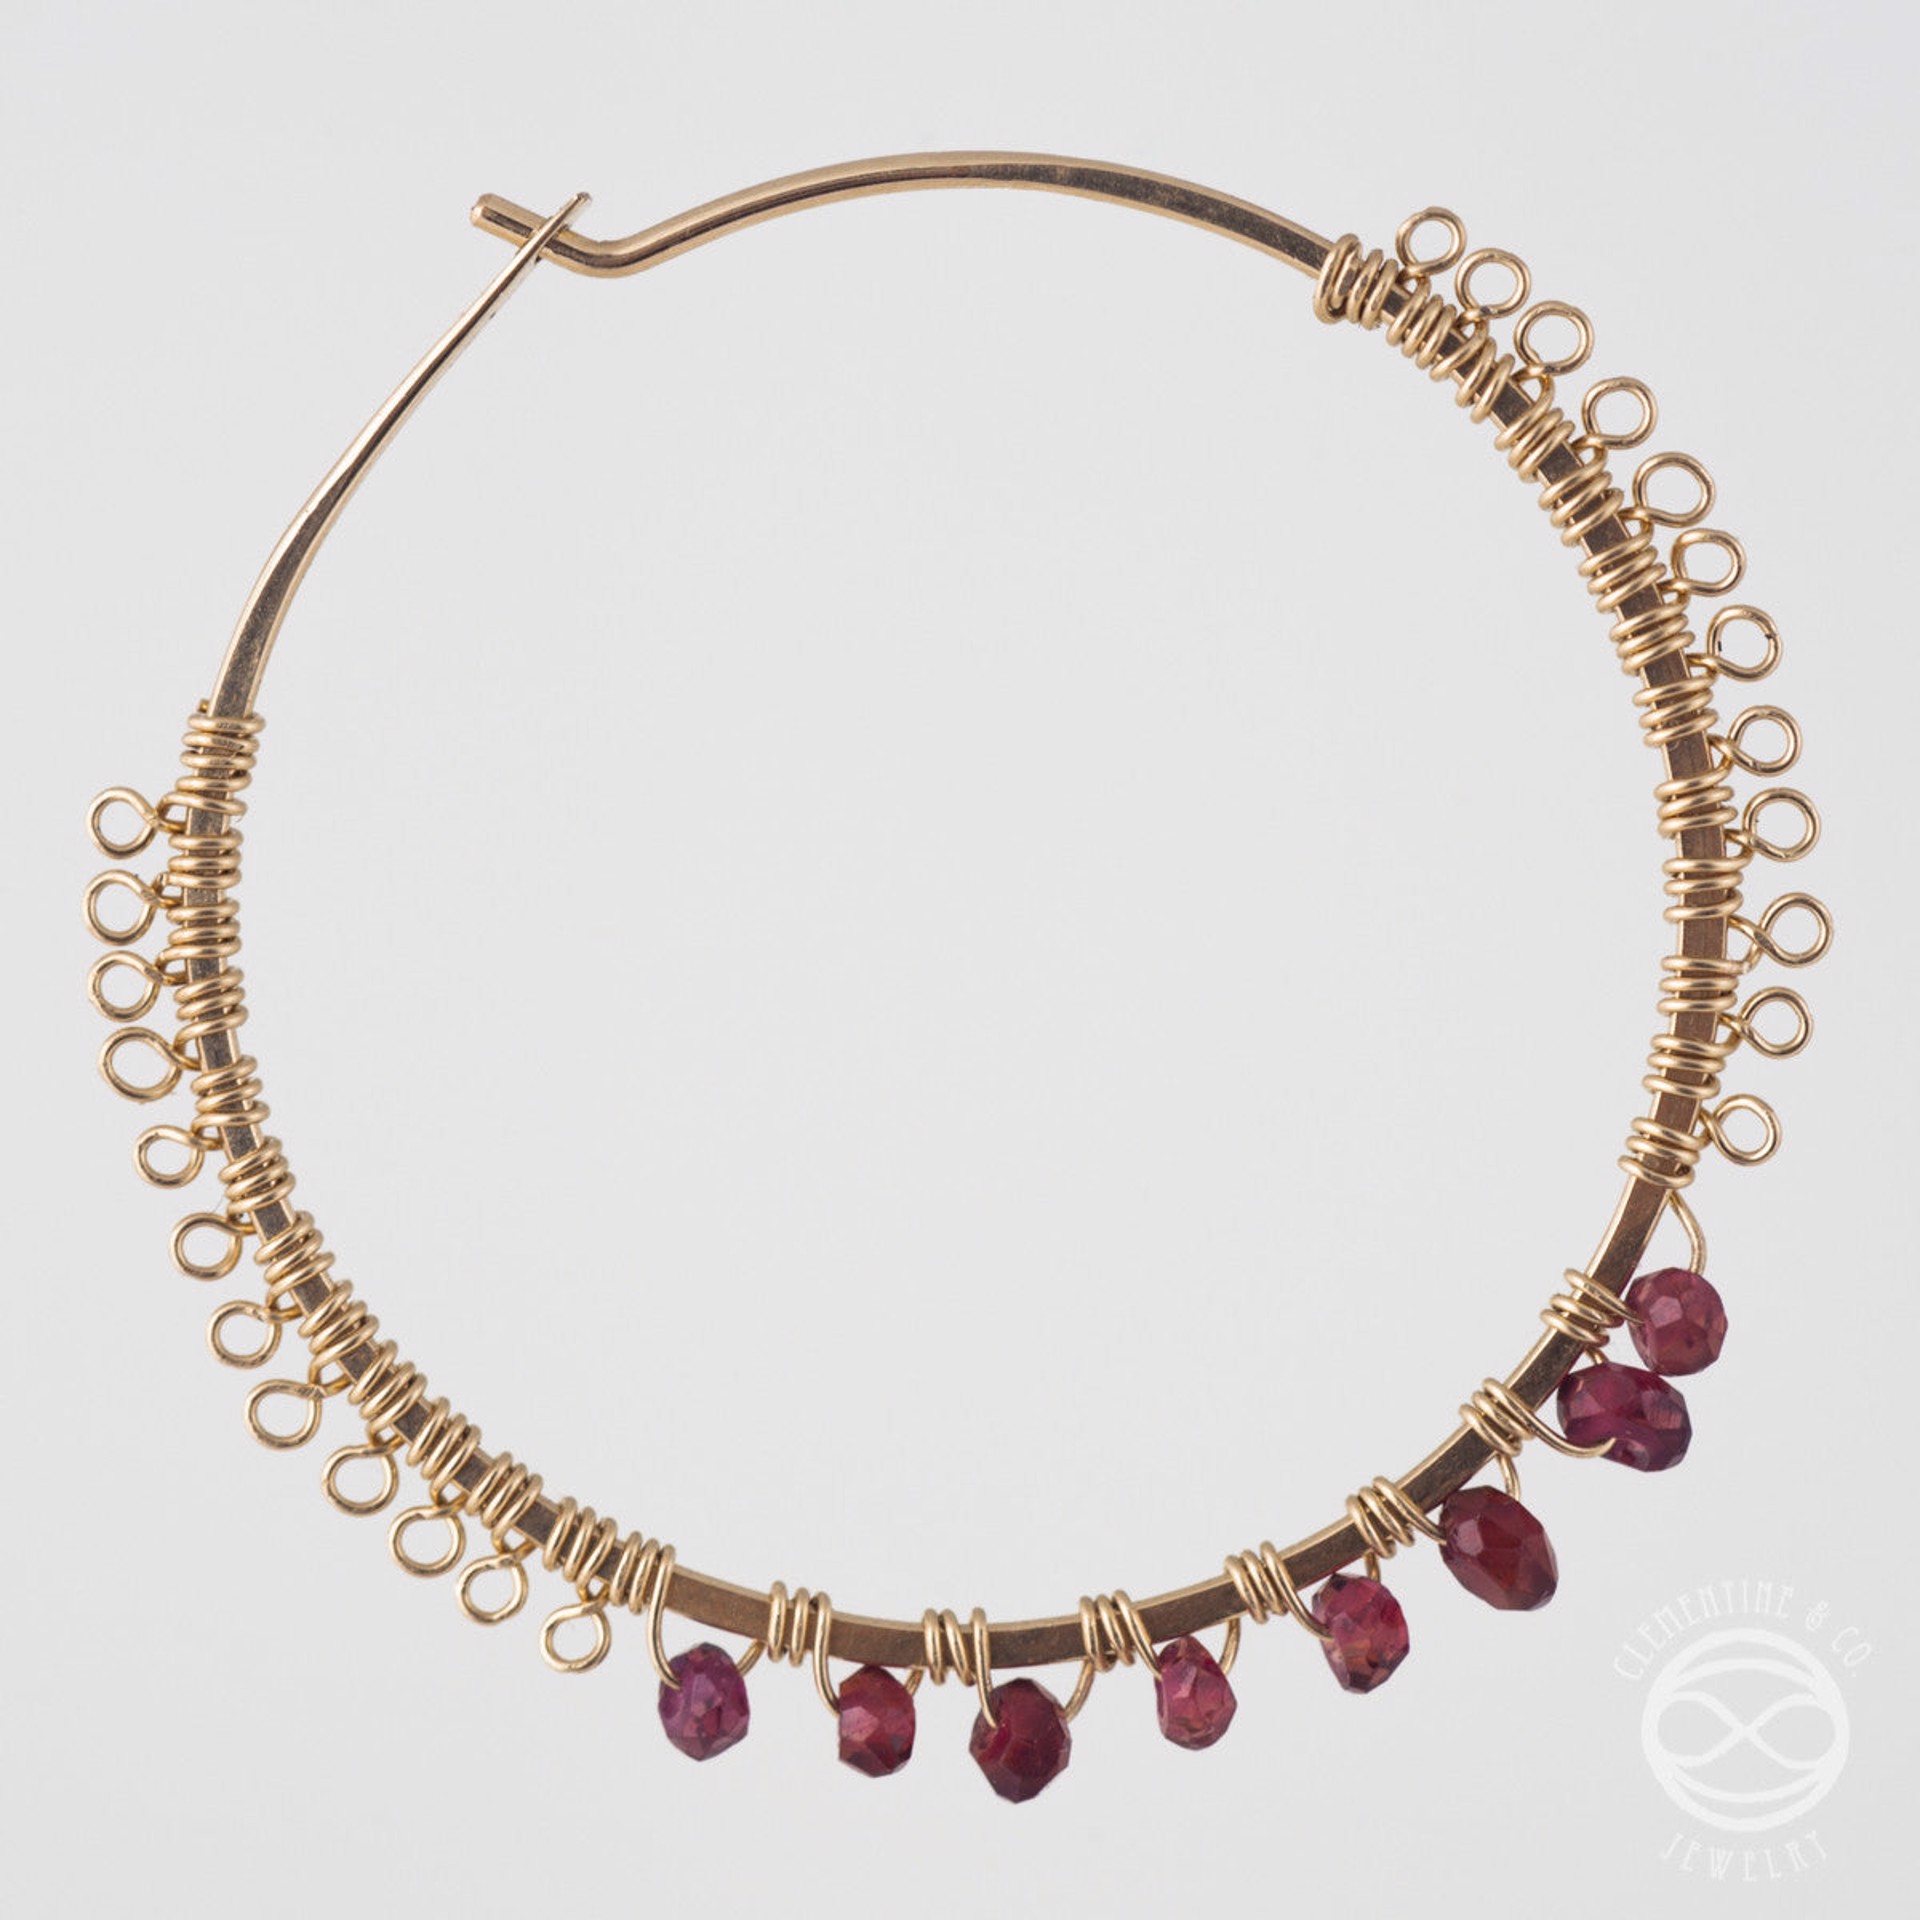 Filigree Hoops in Gold - amethyst by Clementine & Co. Jewelry